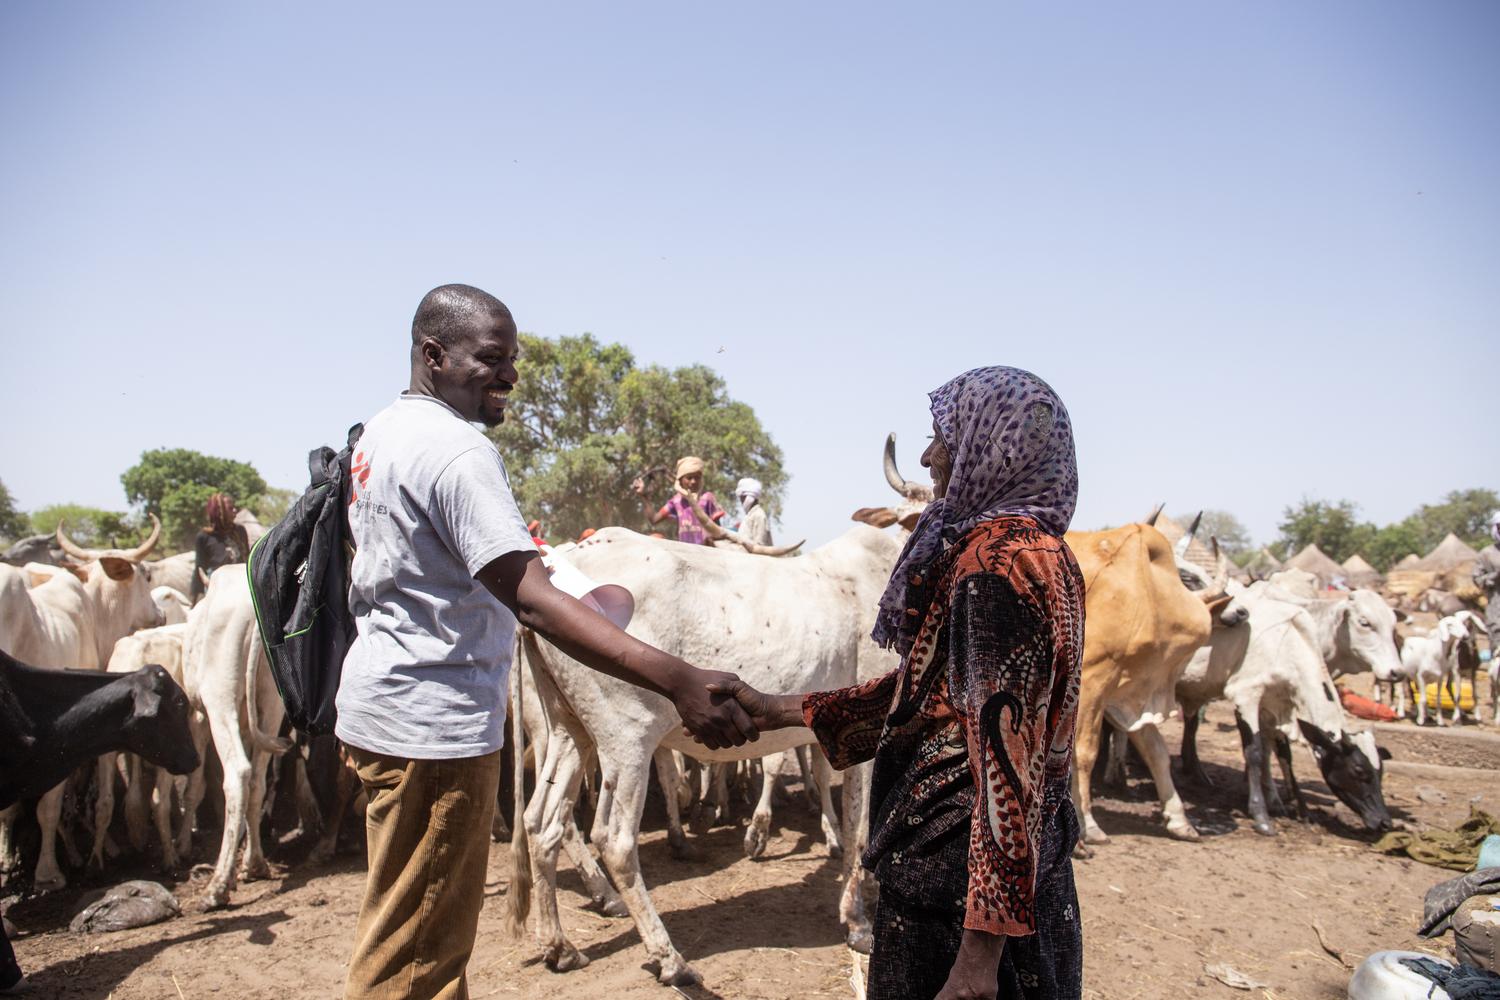 A member of MSF’s Chad Emergency Response Unit informs a nomad woman of the arrival of our measles vaccination teams in the outskirts of Djouna, Am Timan district. Chad, April 2019. 